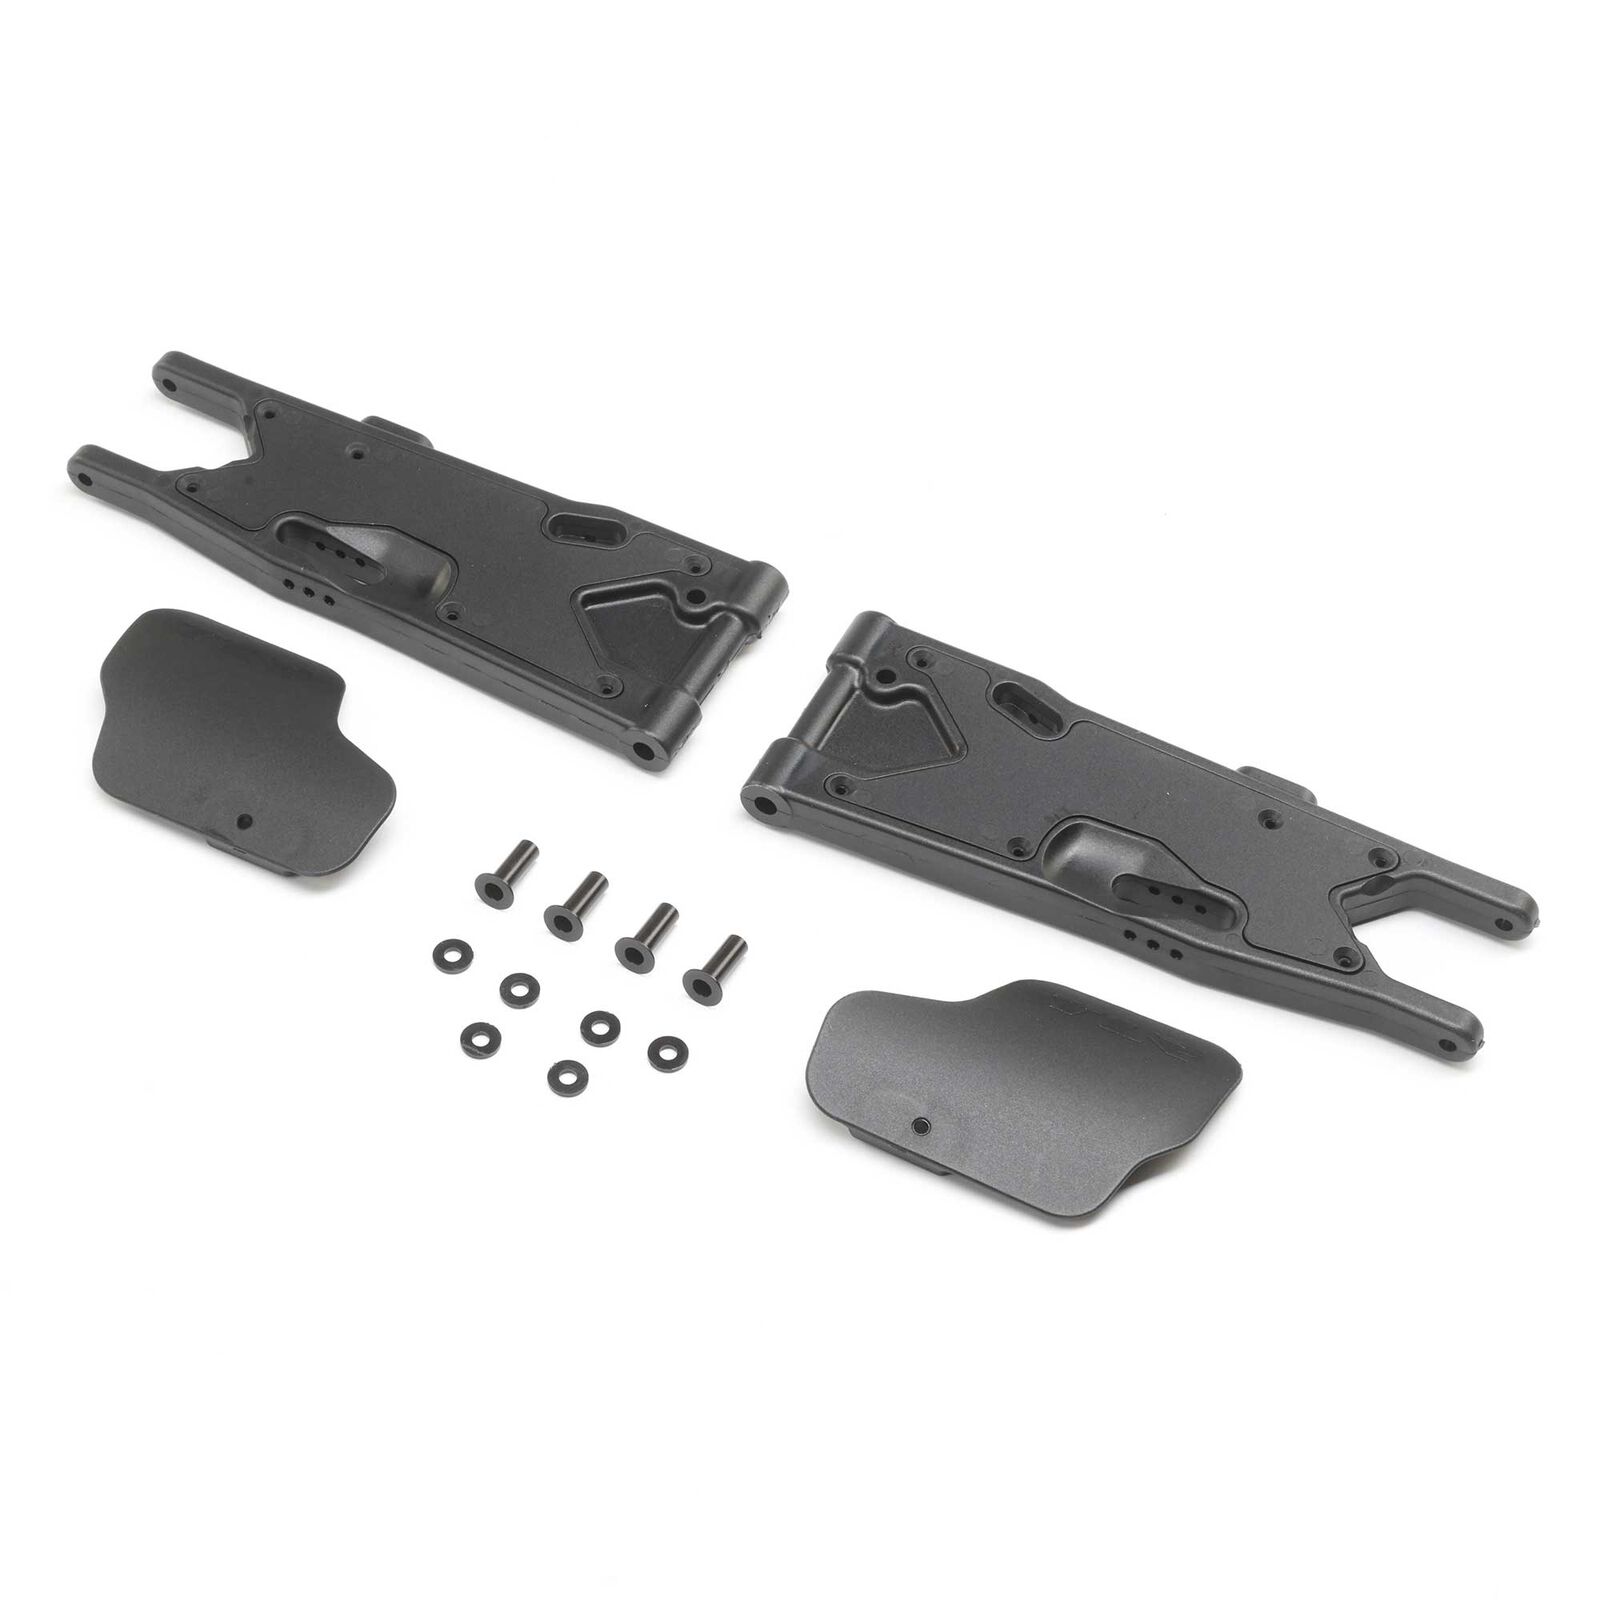 Rear Arms Mud Guards Inserts (2): 8XT